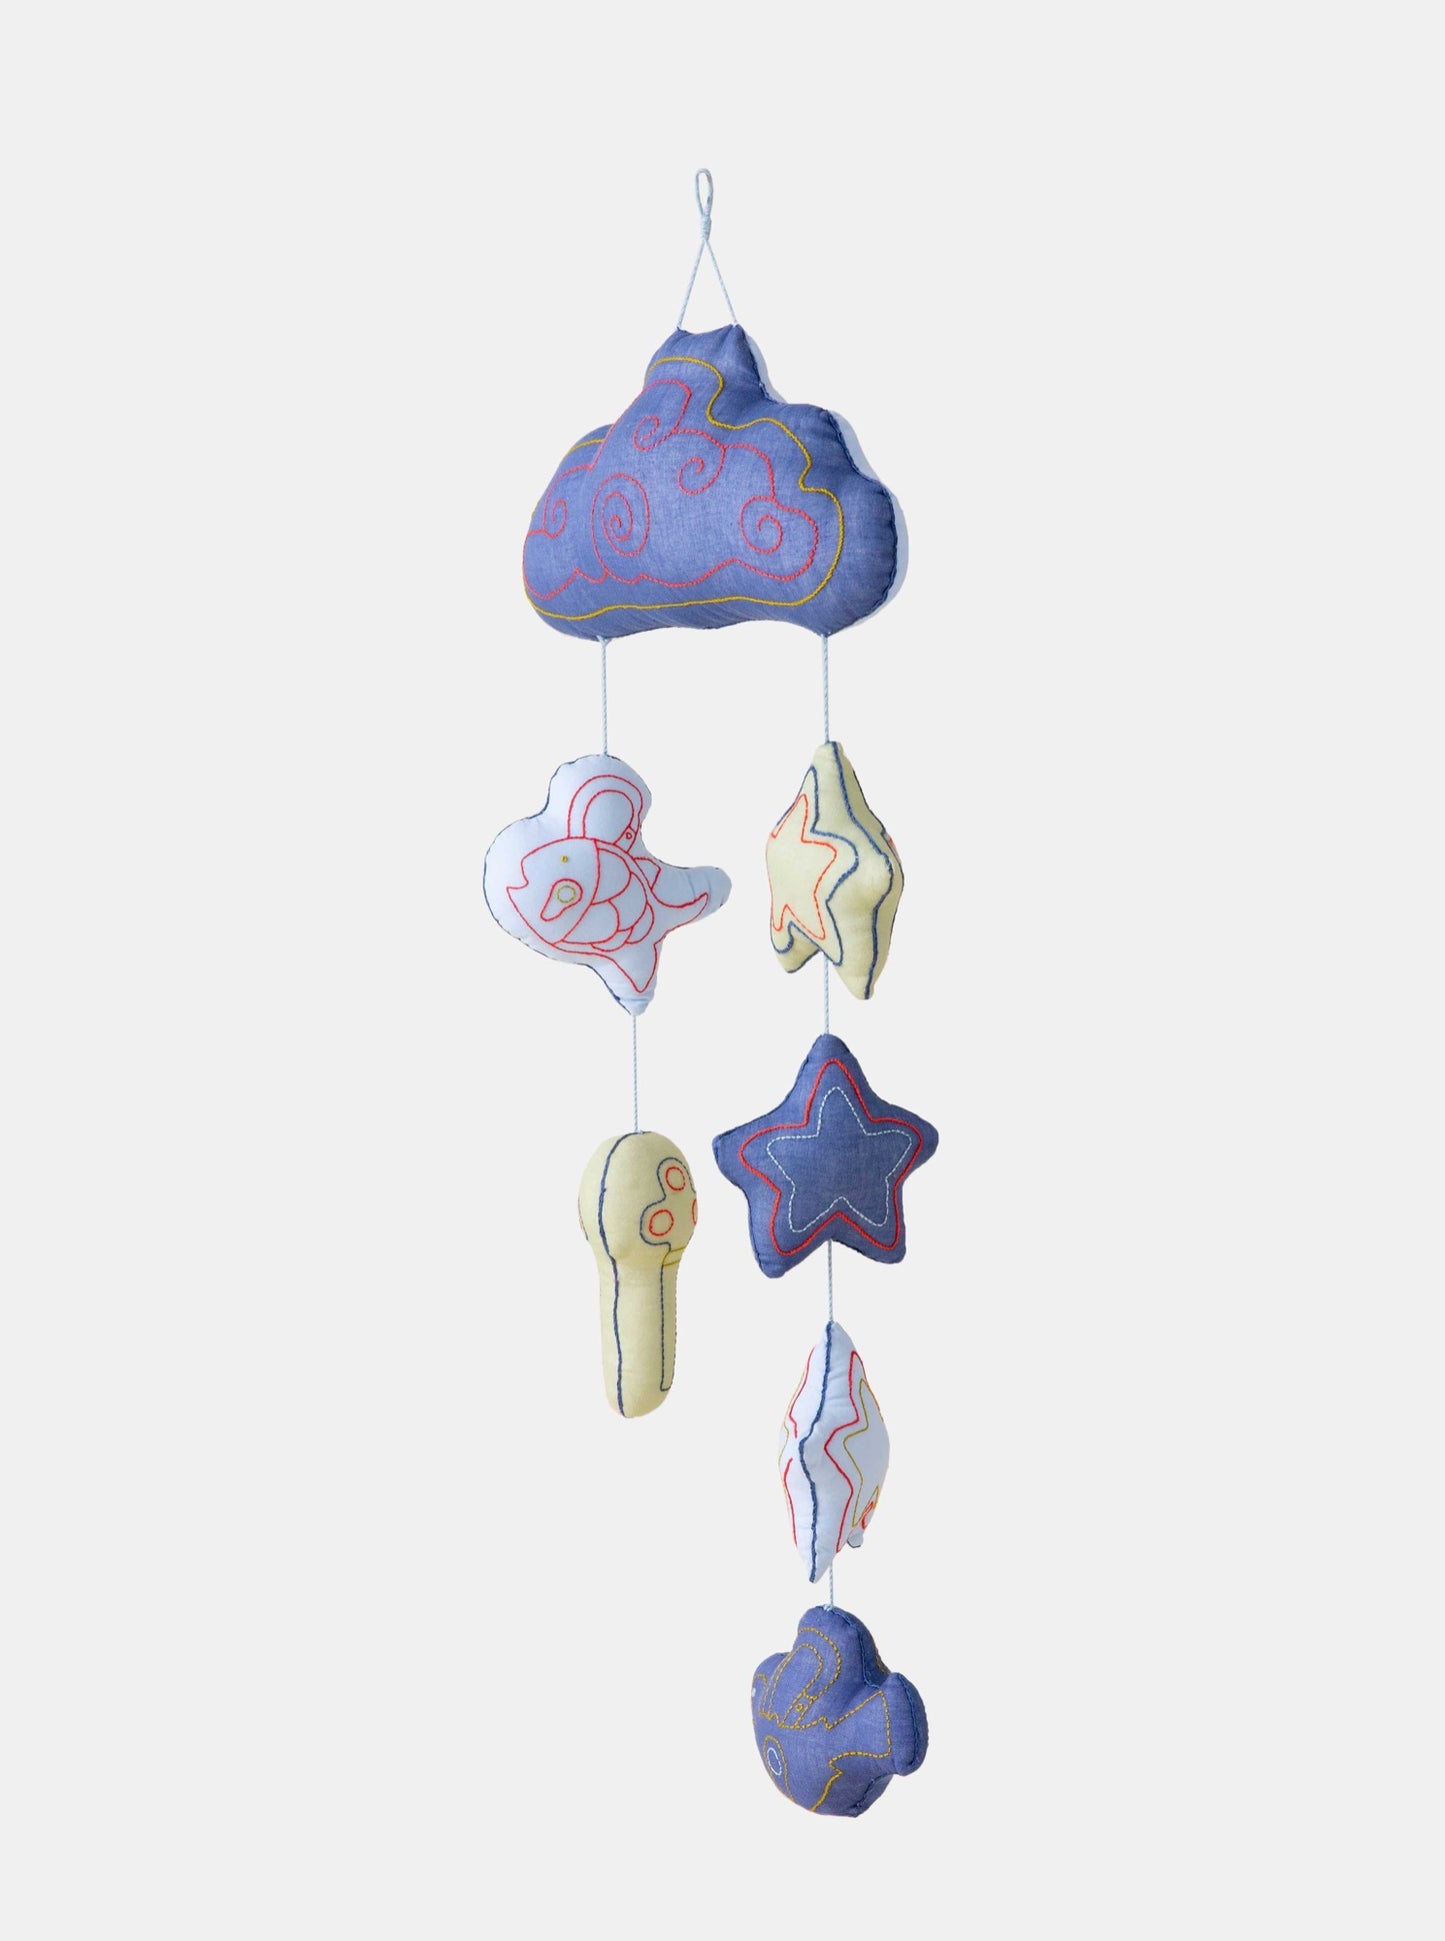 Blue Lucky Charm baby mobile hanging from ceiling